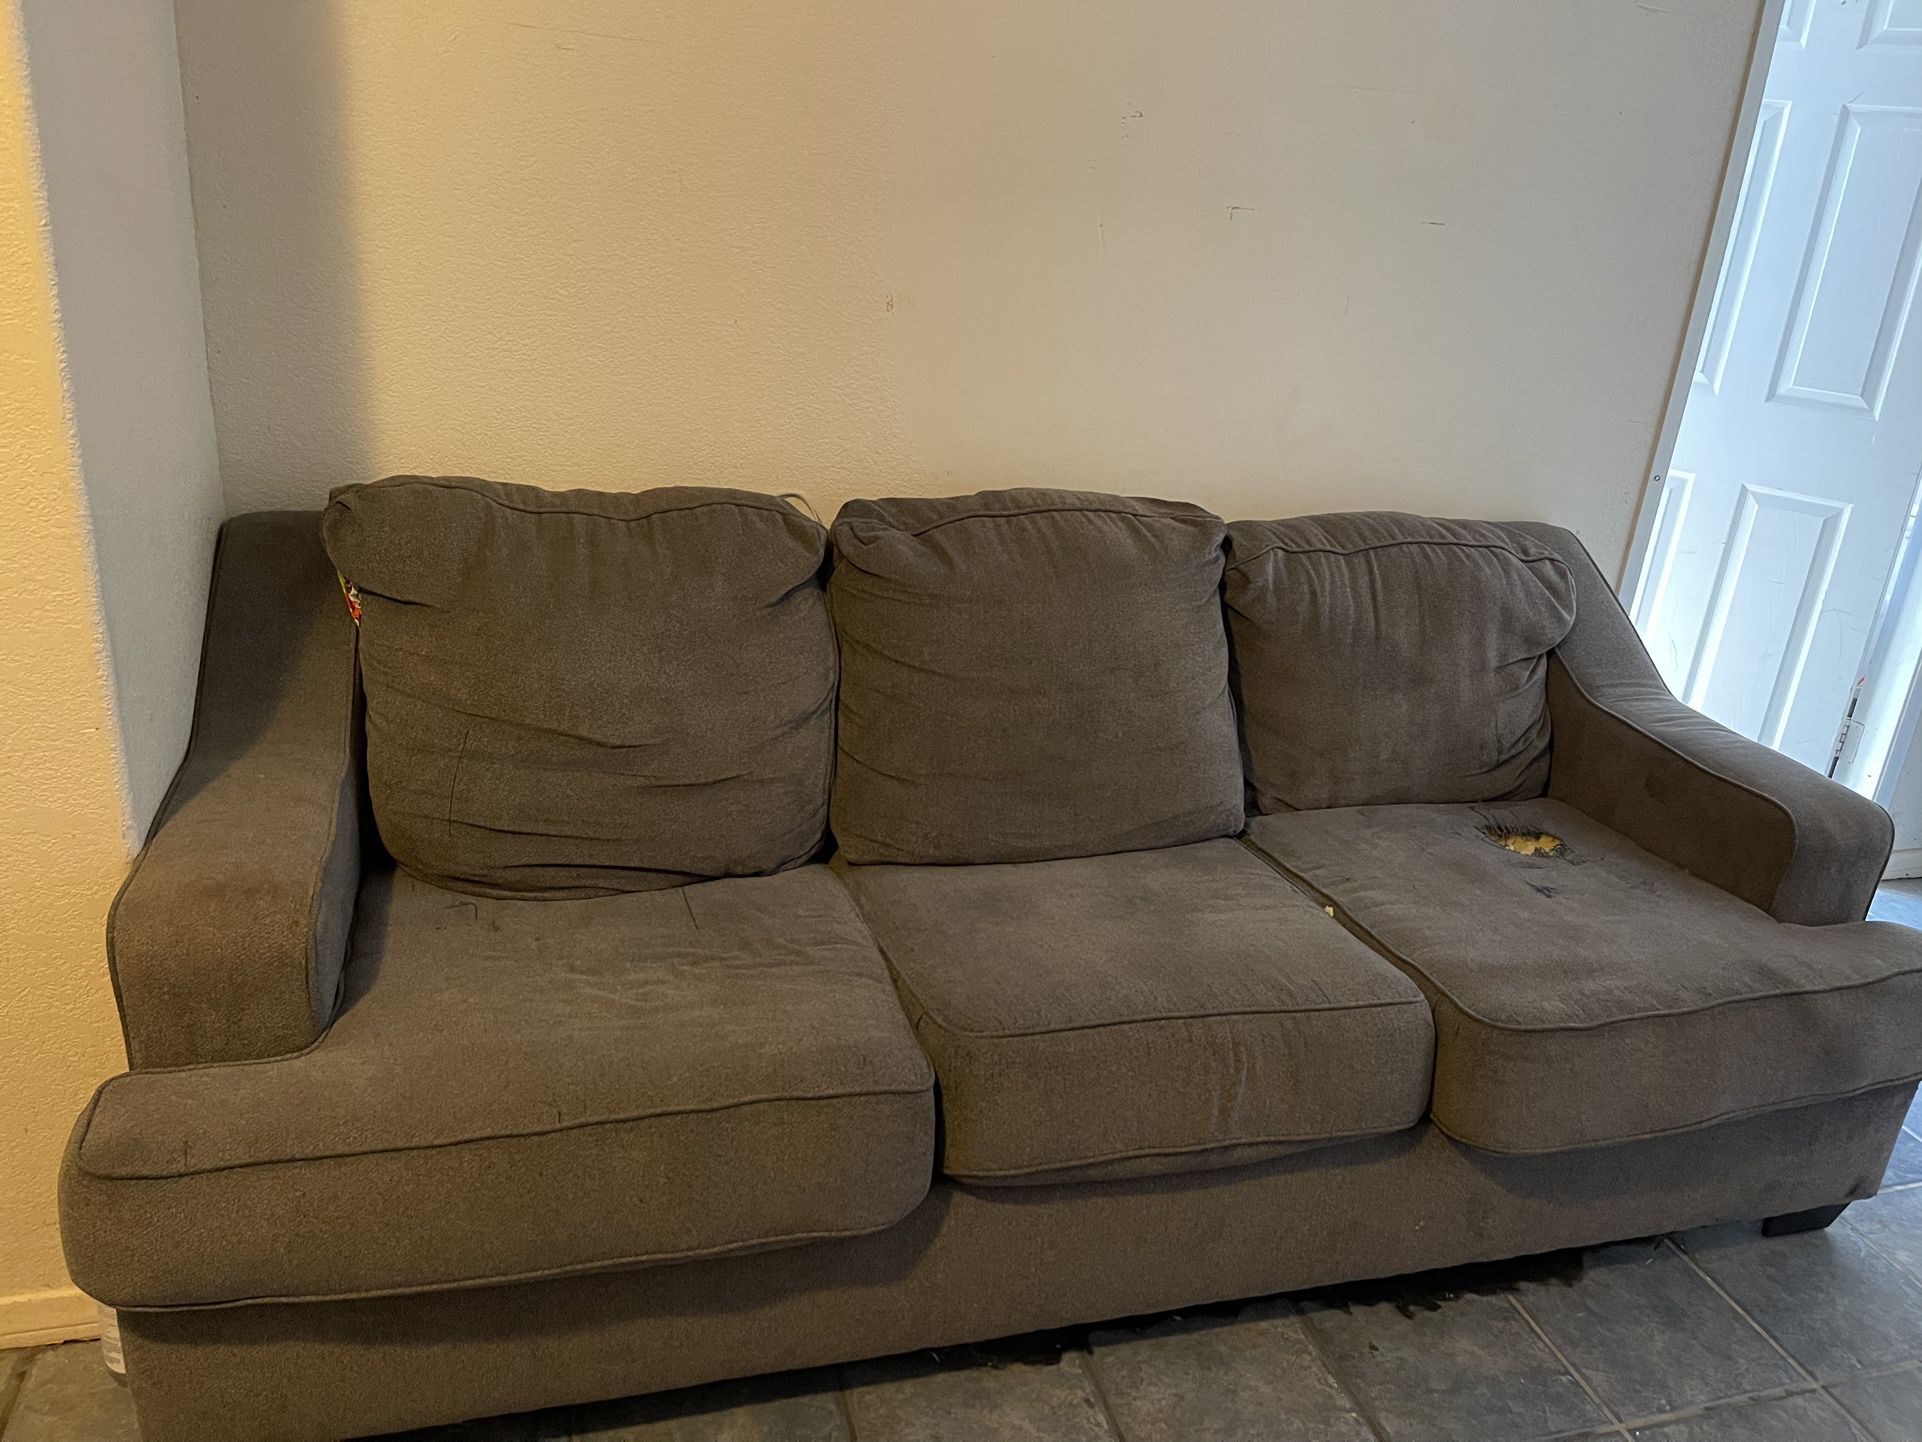 Free Grey Couch 